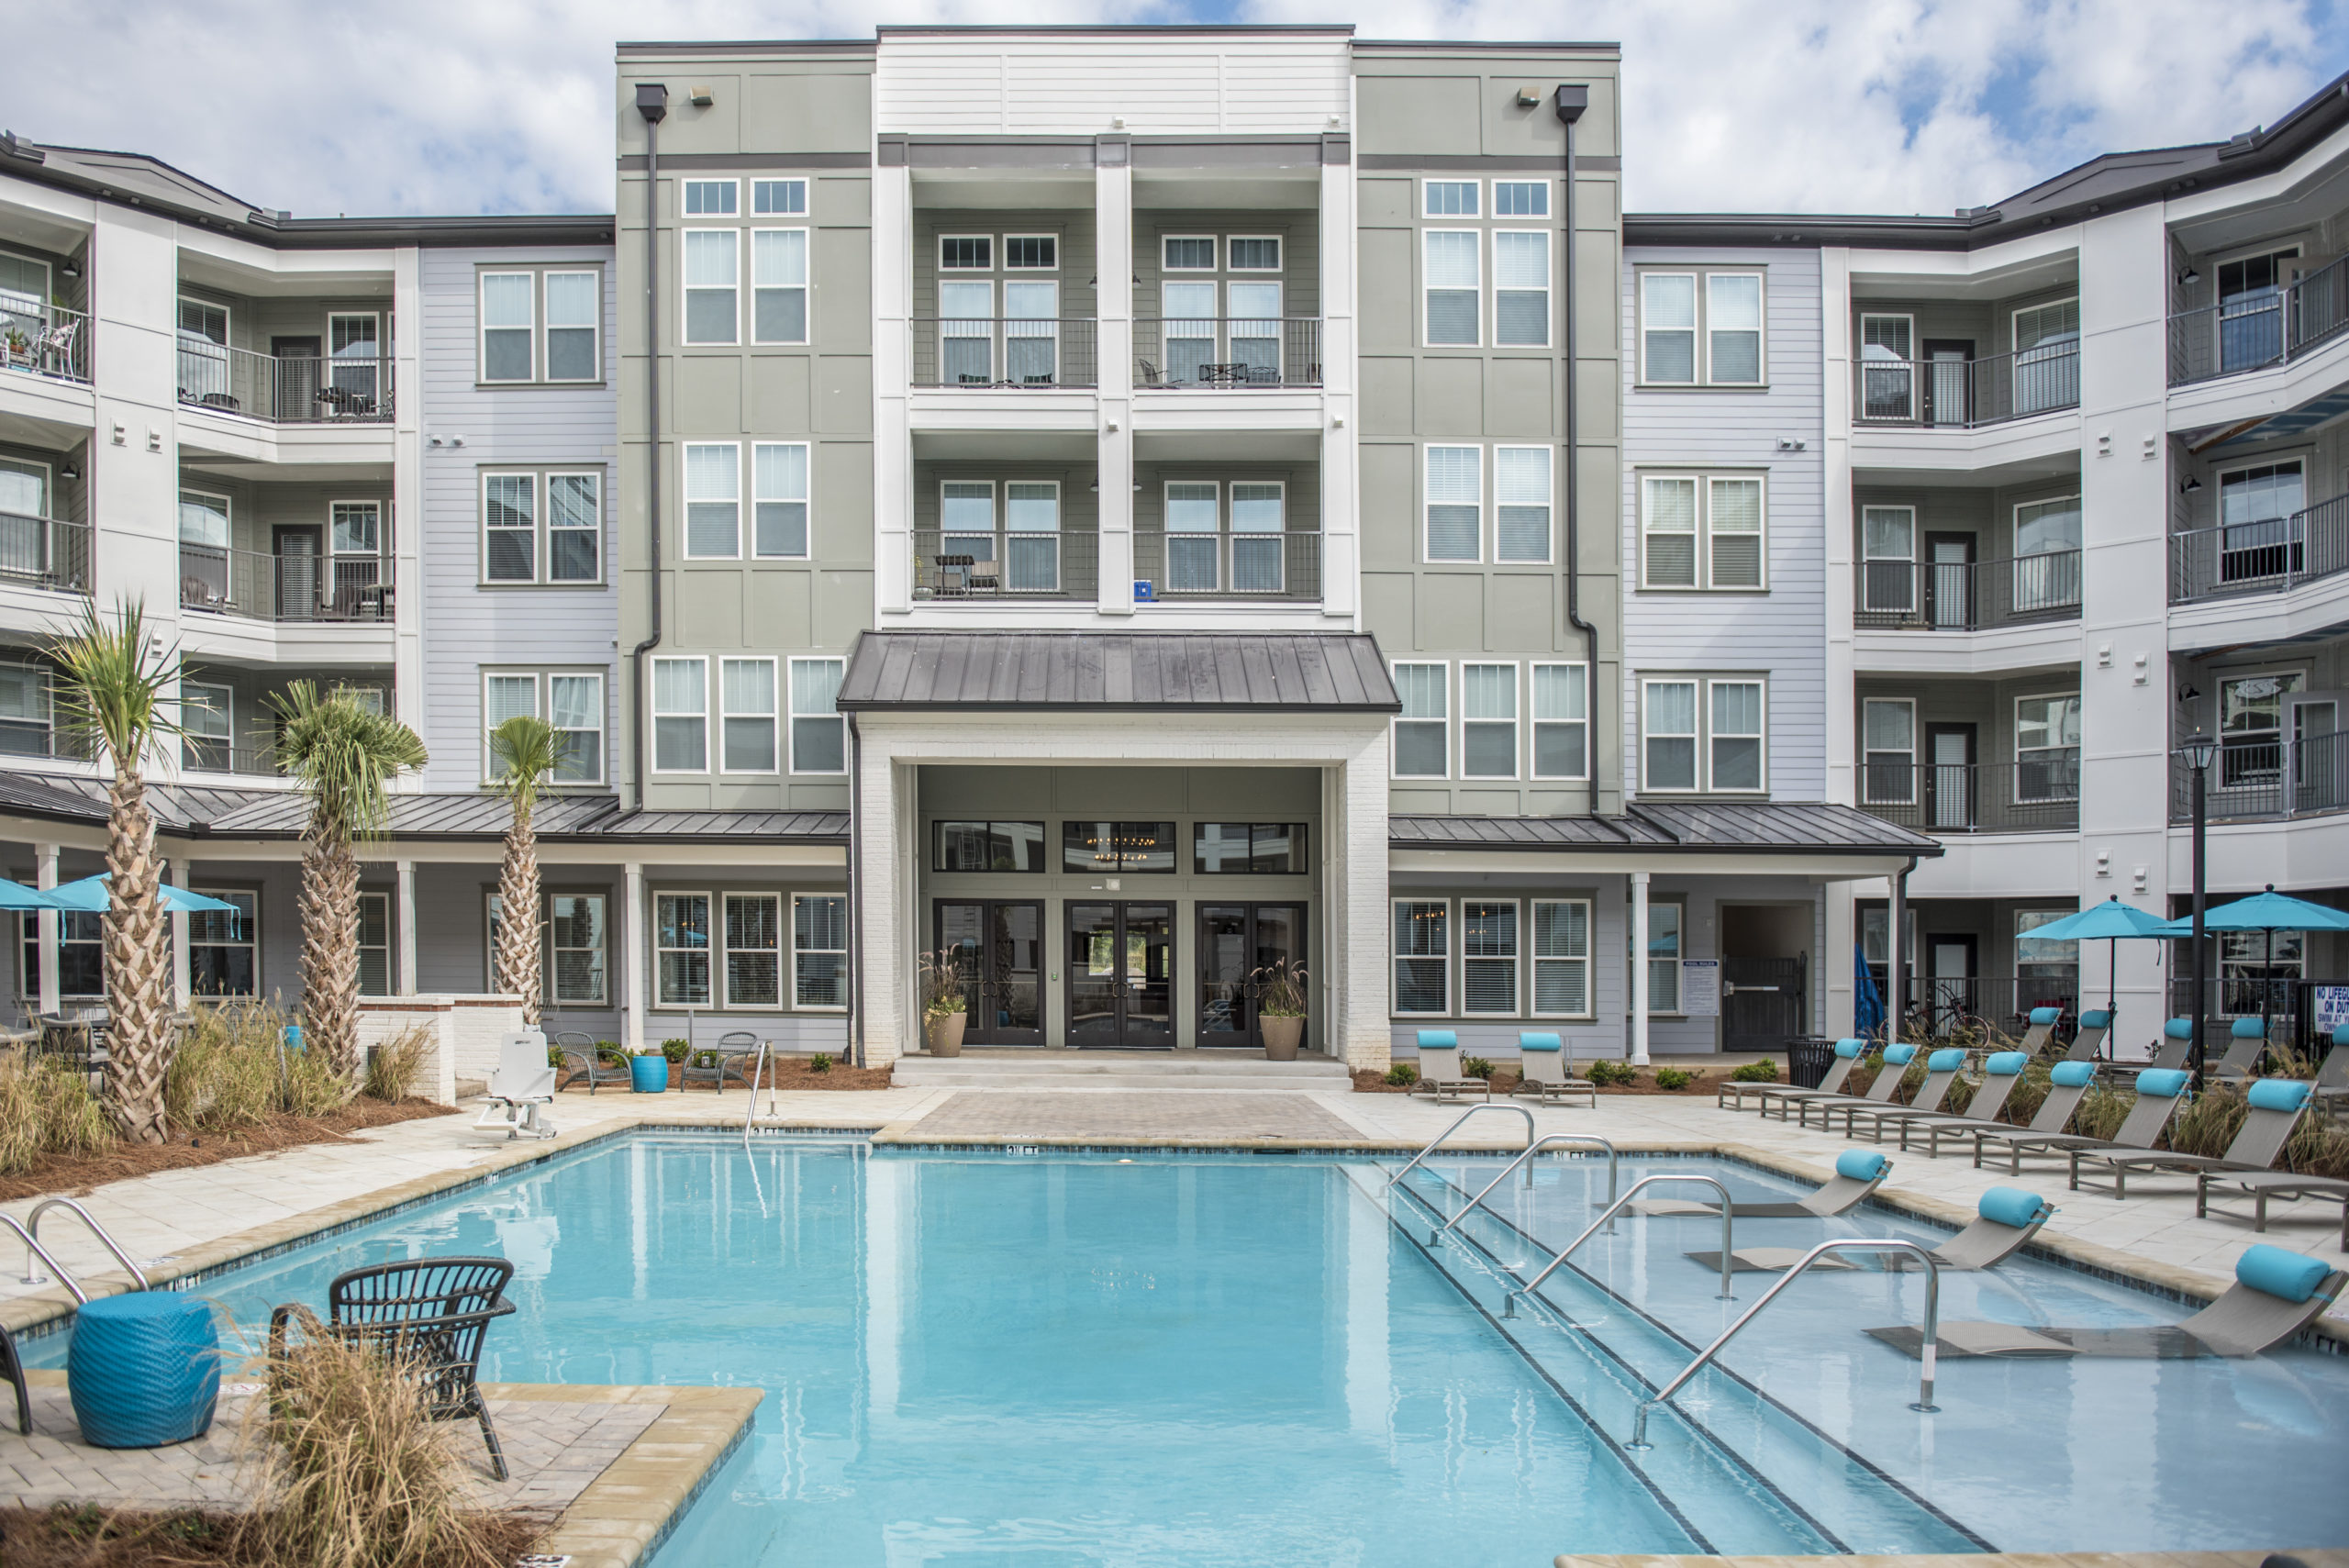 Ironwood – North Augusta, SC - Pool and Building headon